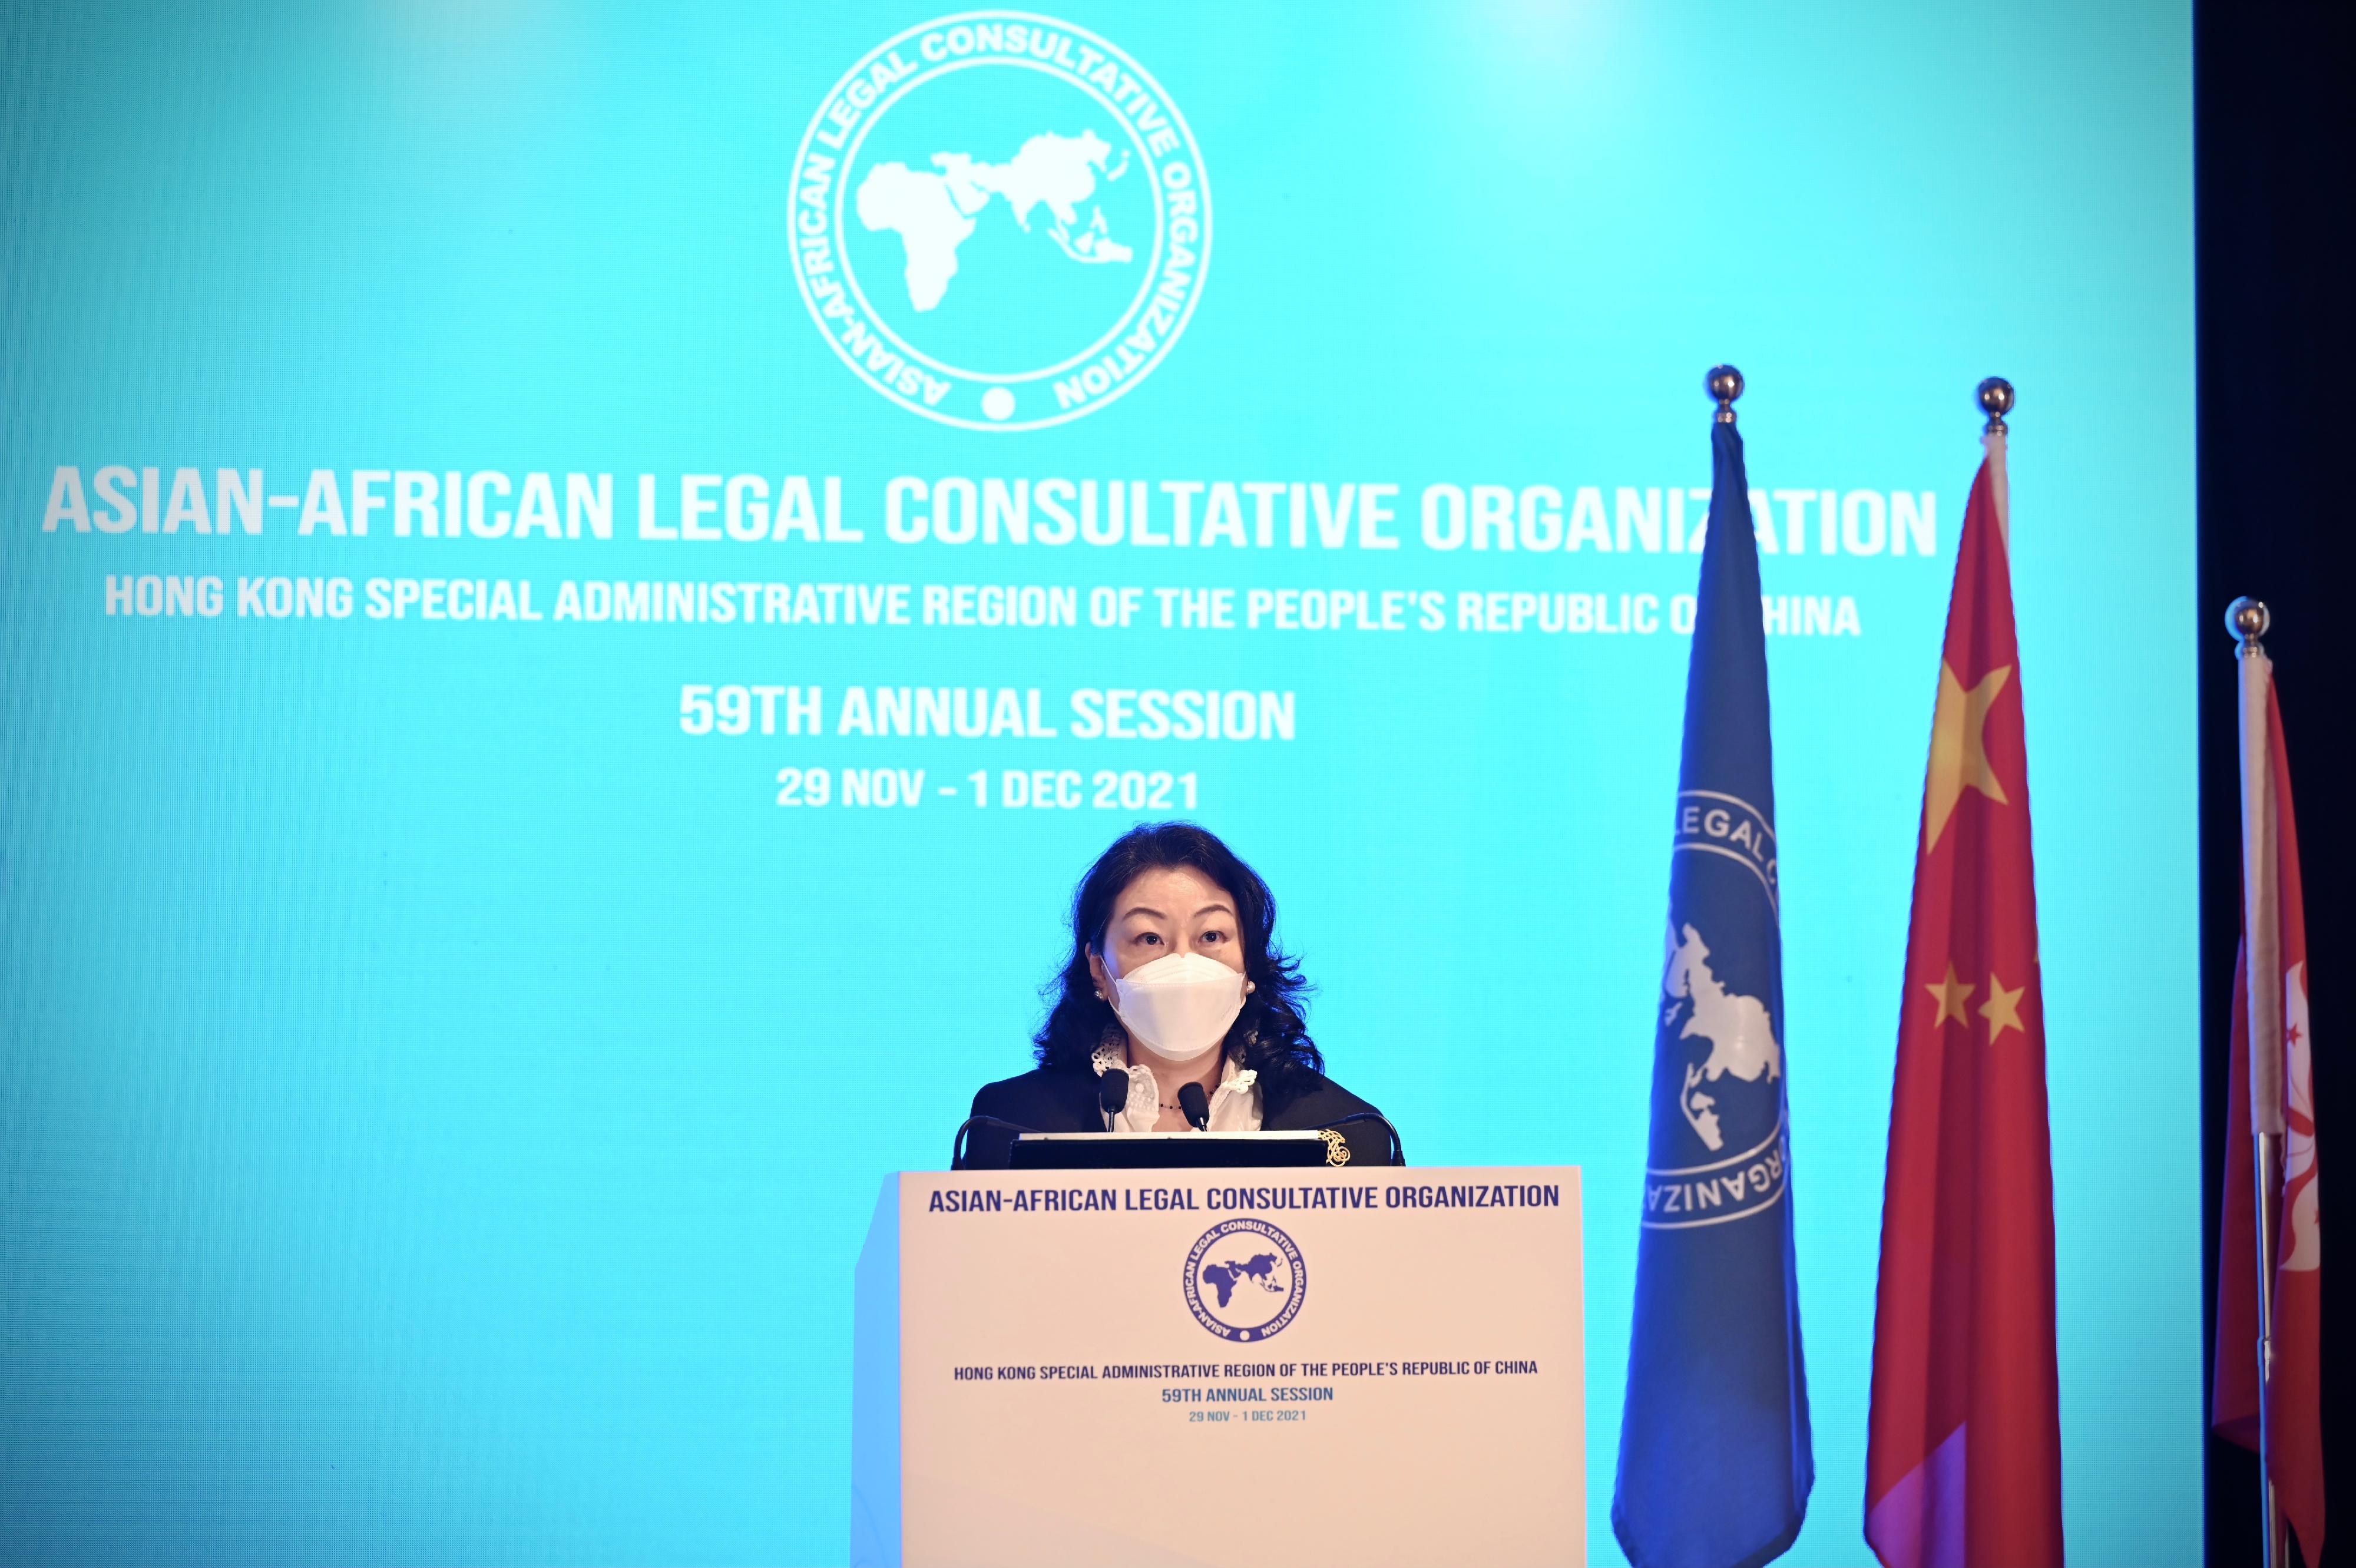 The 59th Annual Session of the Asian-African Legal Consultative Organization (AALCO) was successfully launched today (November 29). The Secretary for Justice, Ms Teresa Cheng, SC, was elected the President of the 59th Annual Session of the AALCO.